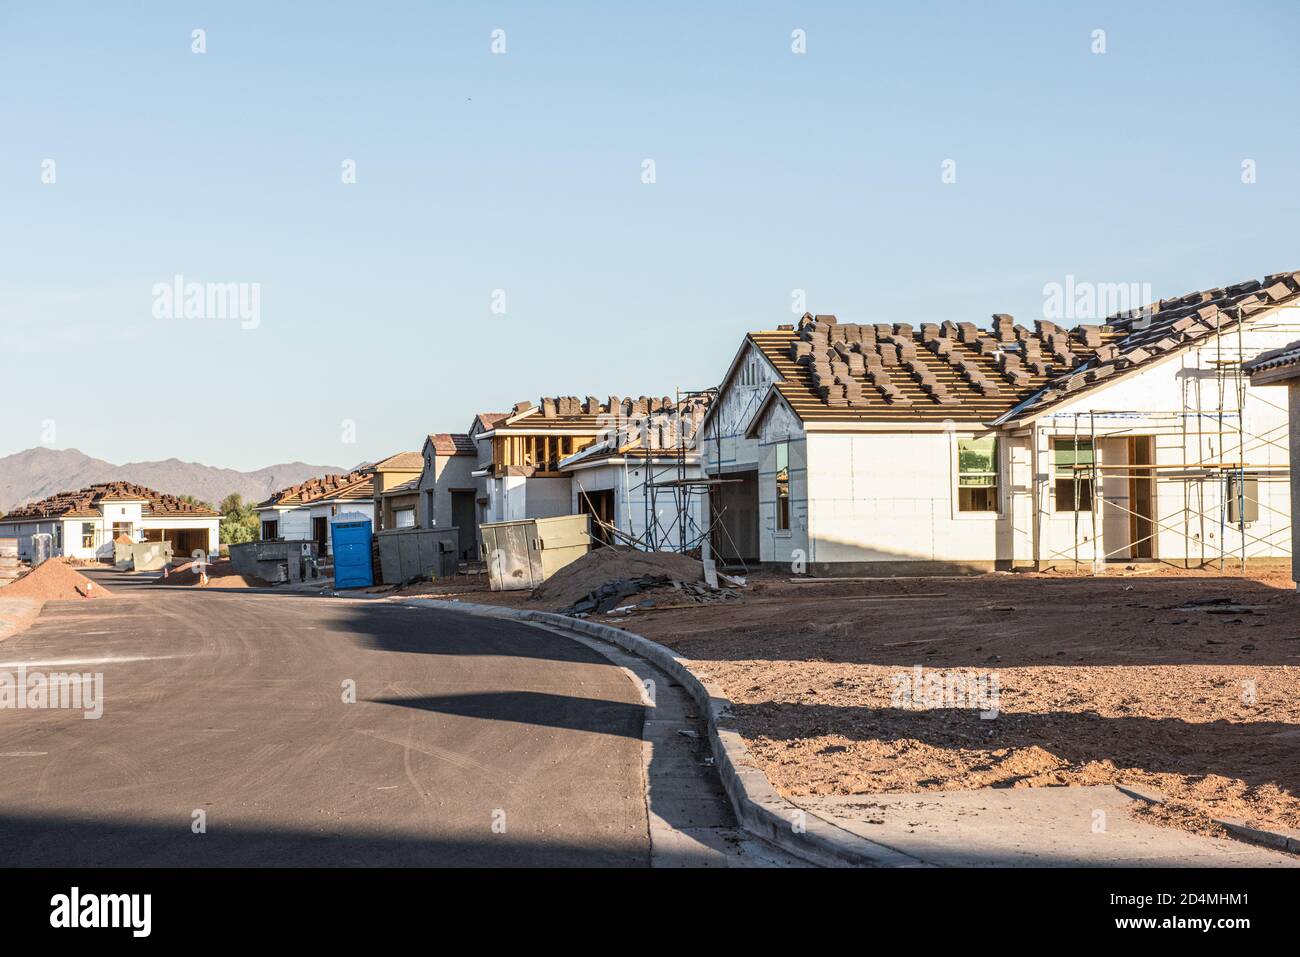 A row of new houses, being constructed during Arizona building boom, stands in early morning light on a dirt lot, horizontal view. Stock Photo